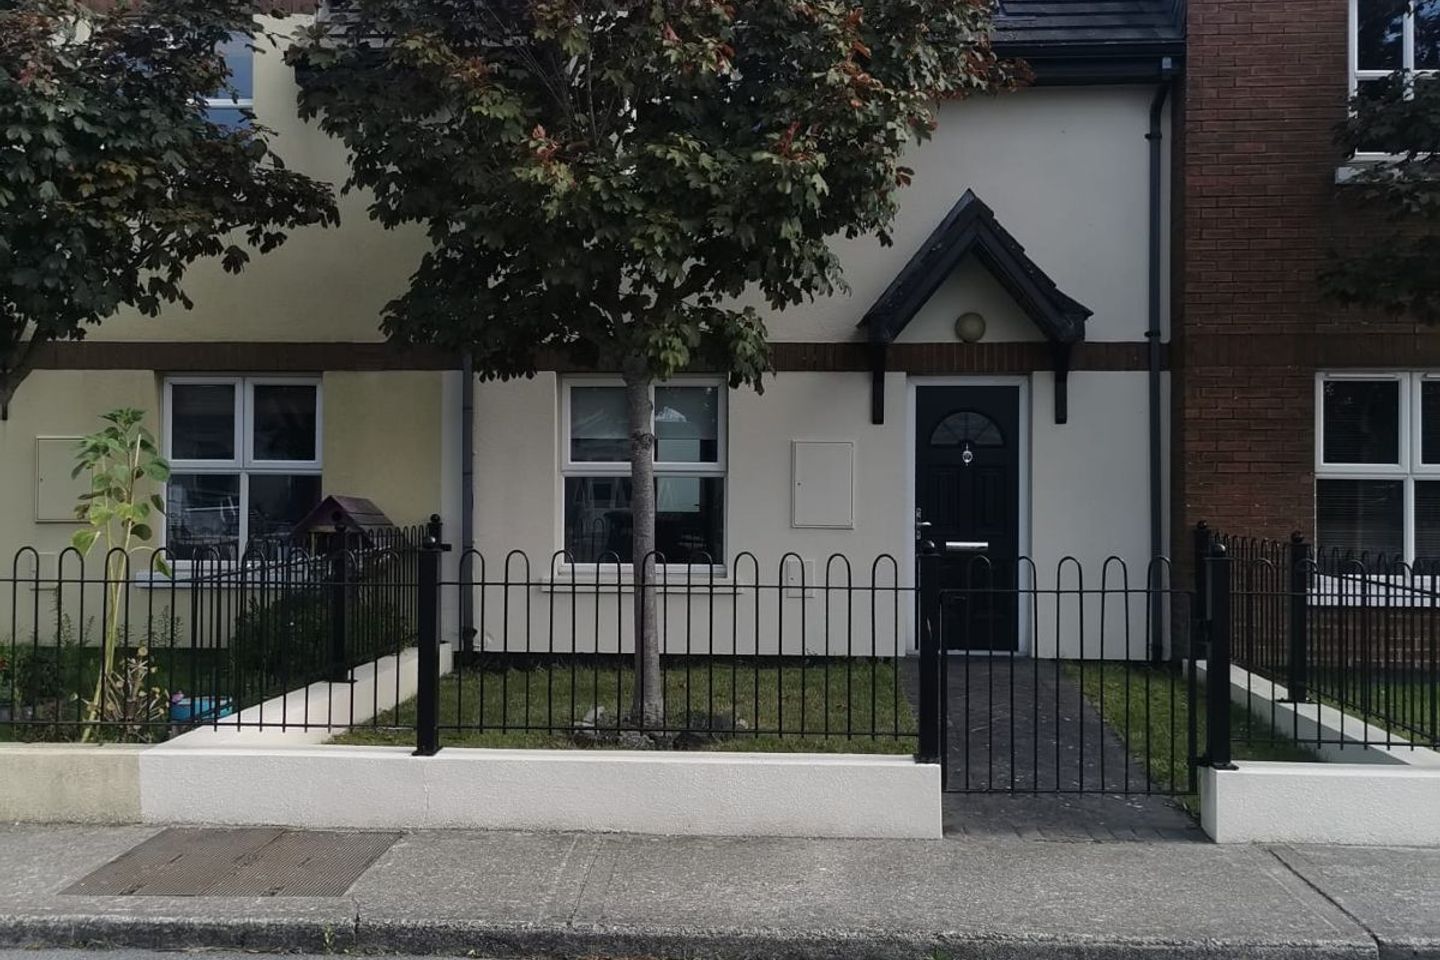 3 Saint Martin's Court, Rosslare Harbour, Wexford, Rosslare Strand, Co. Wexford, Y35AX51